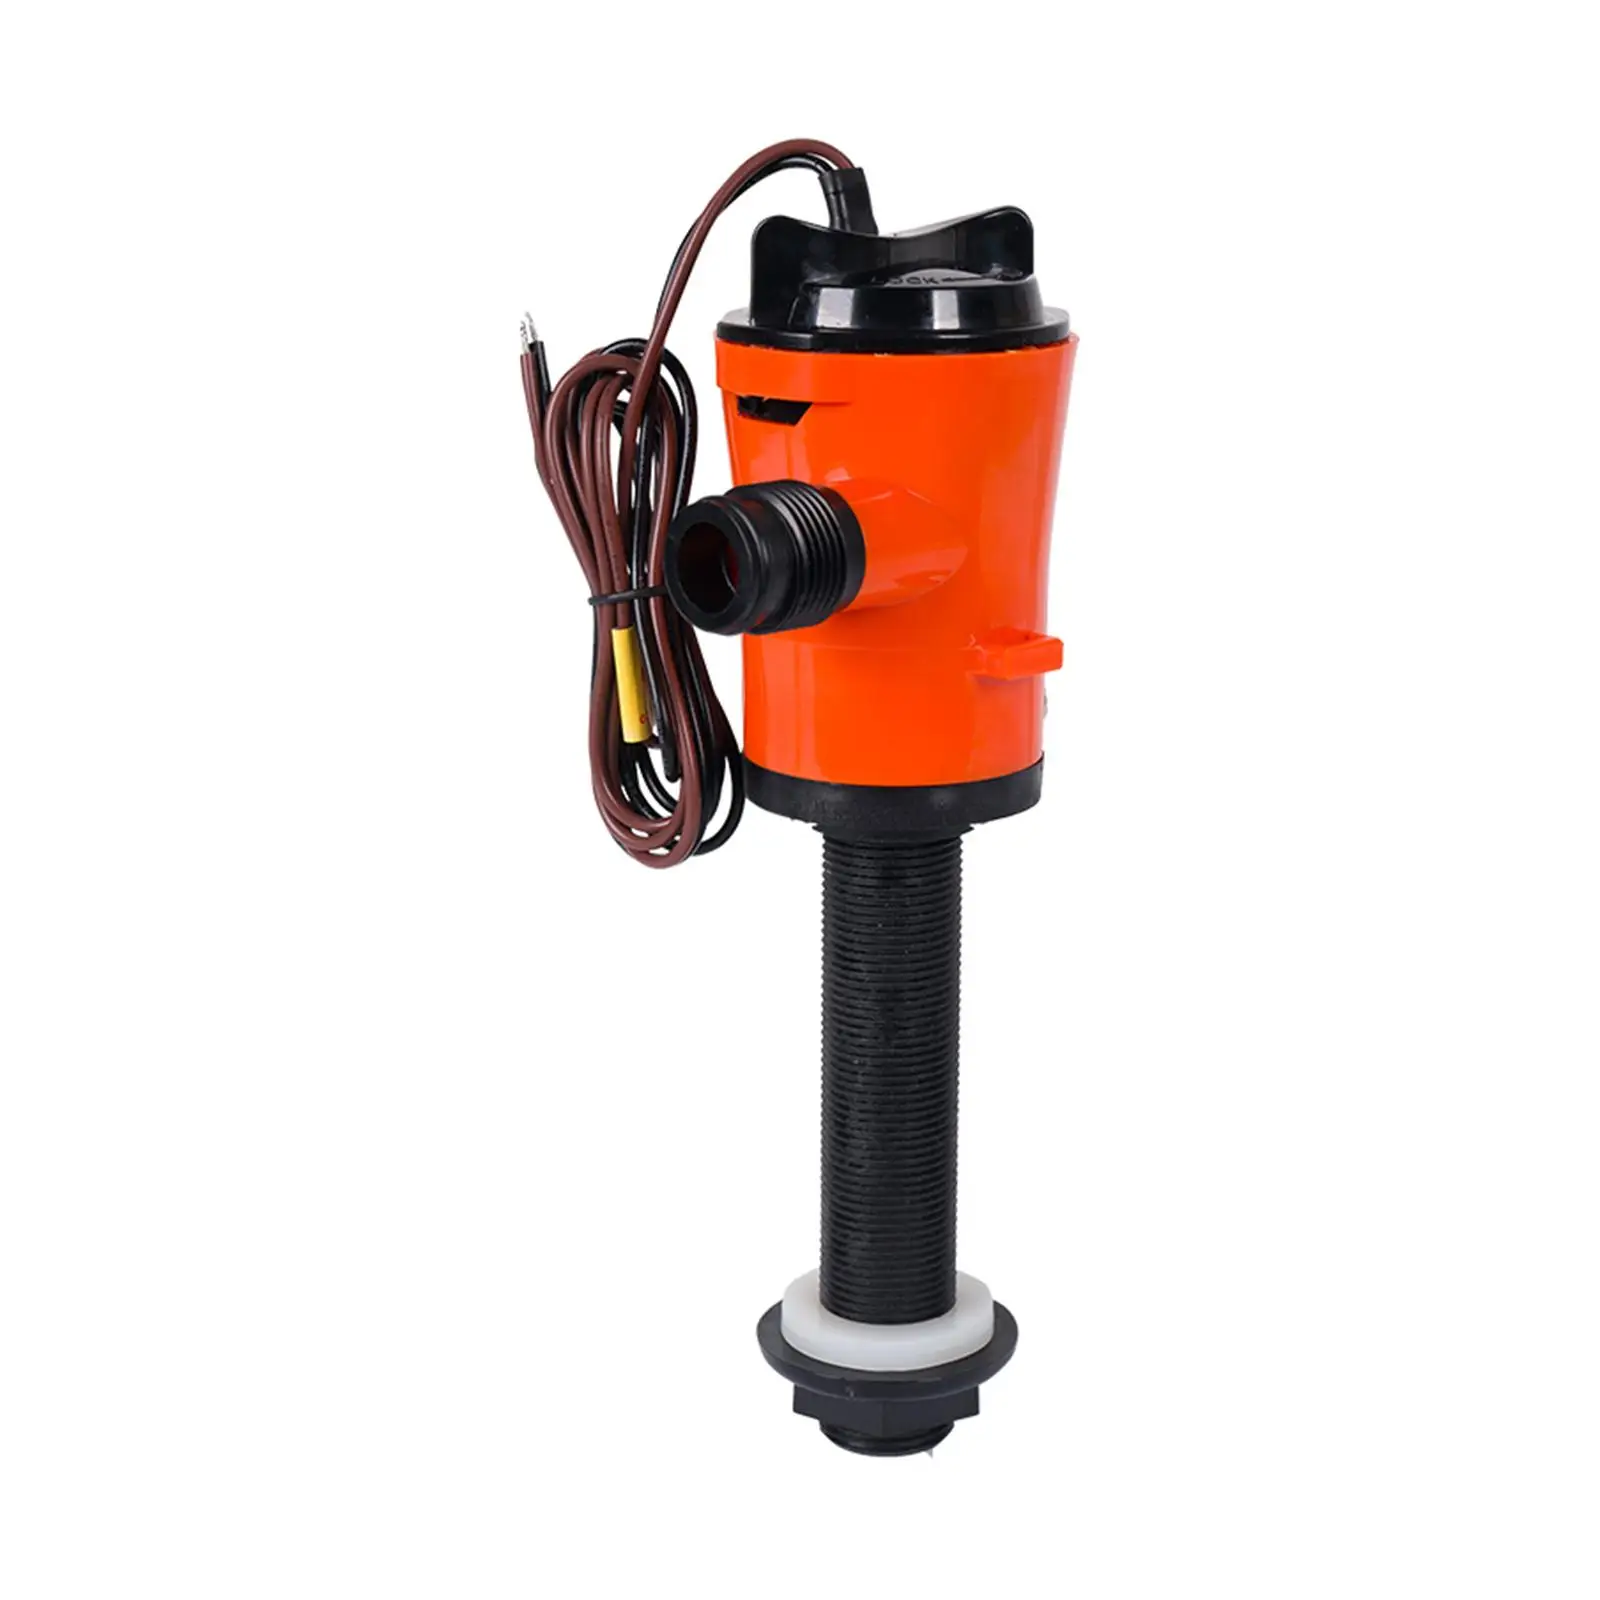 Aerator Livewell Pump Assembly with Filter Spare Parts Replaces Accessory Easy to Install Professional Removable Boat Bilge Pump